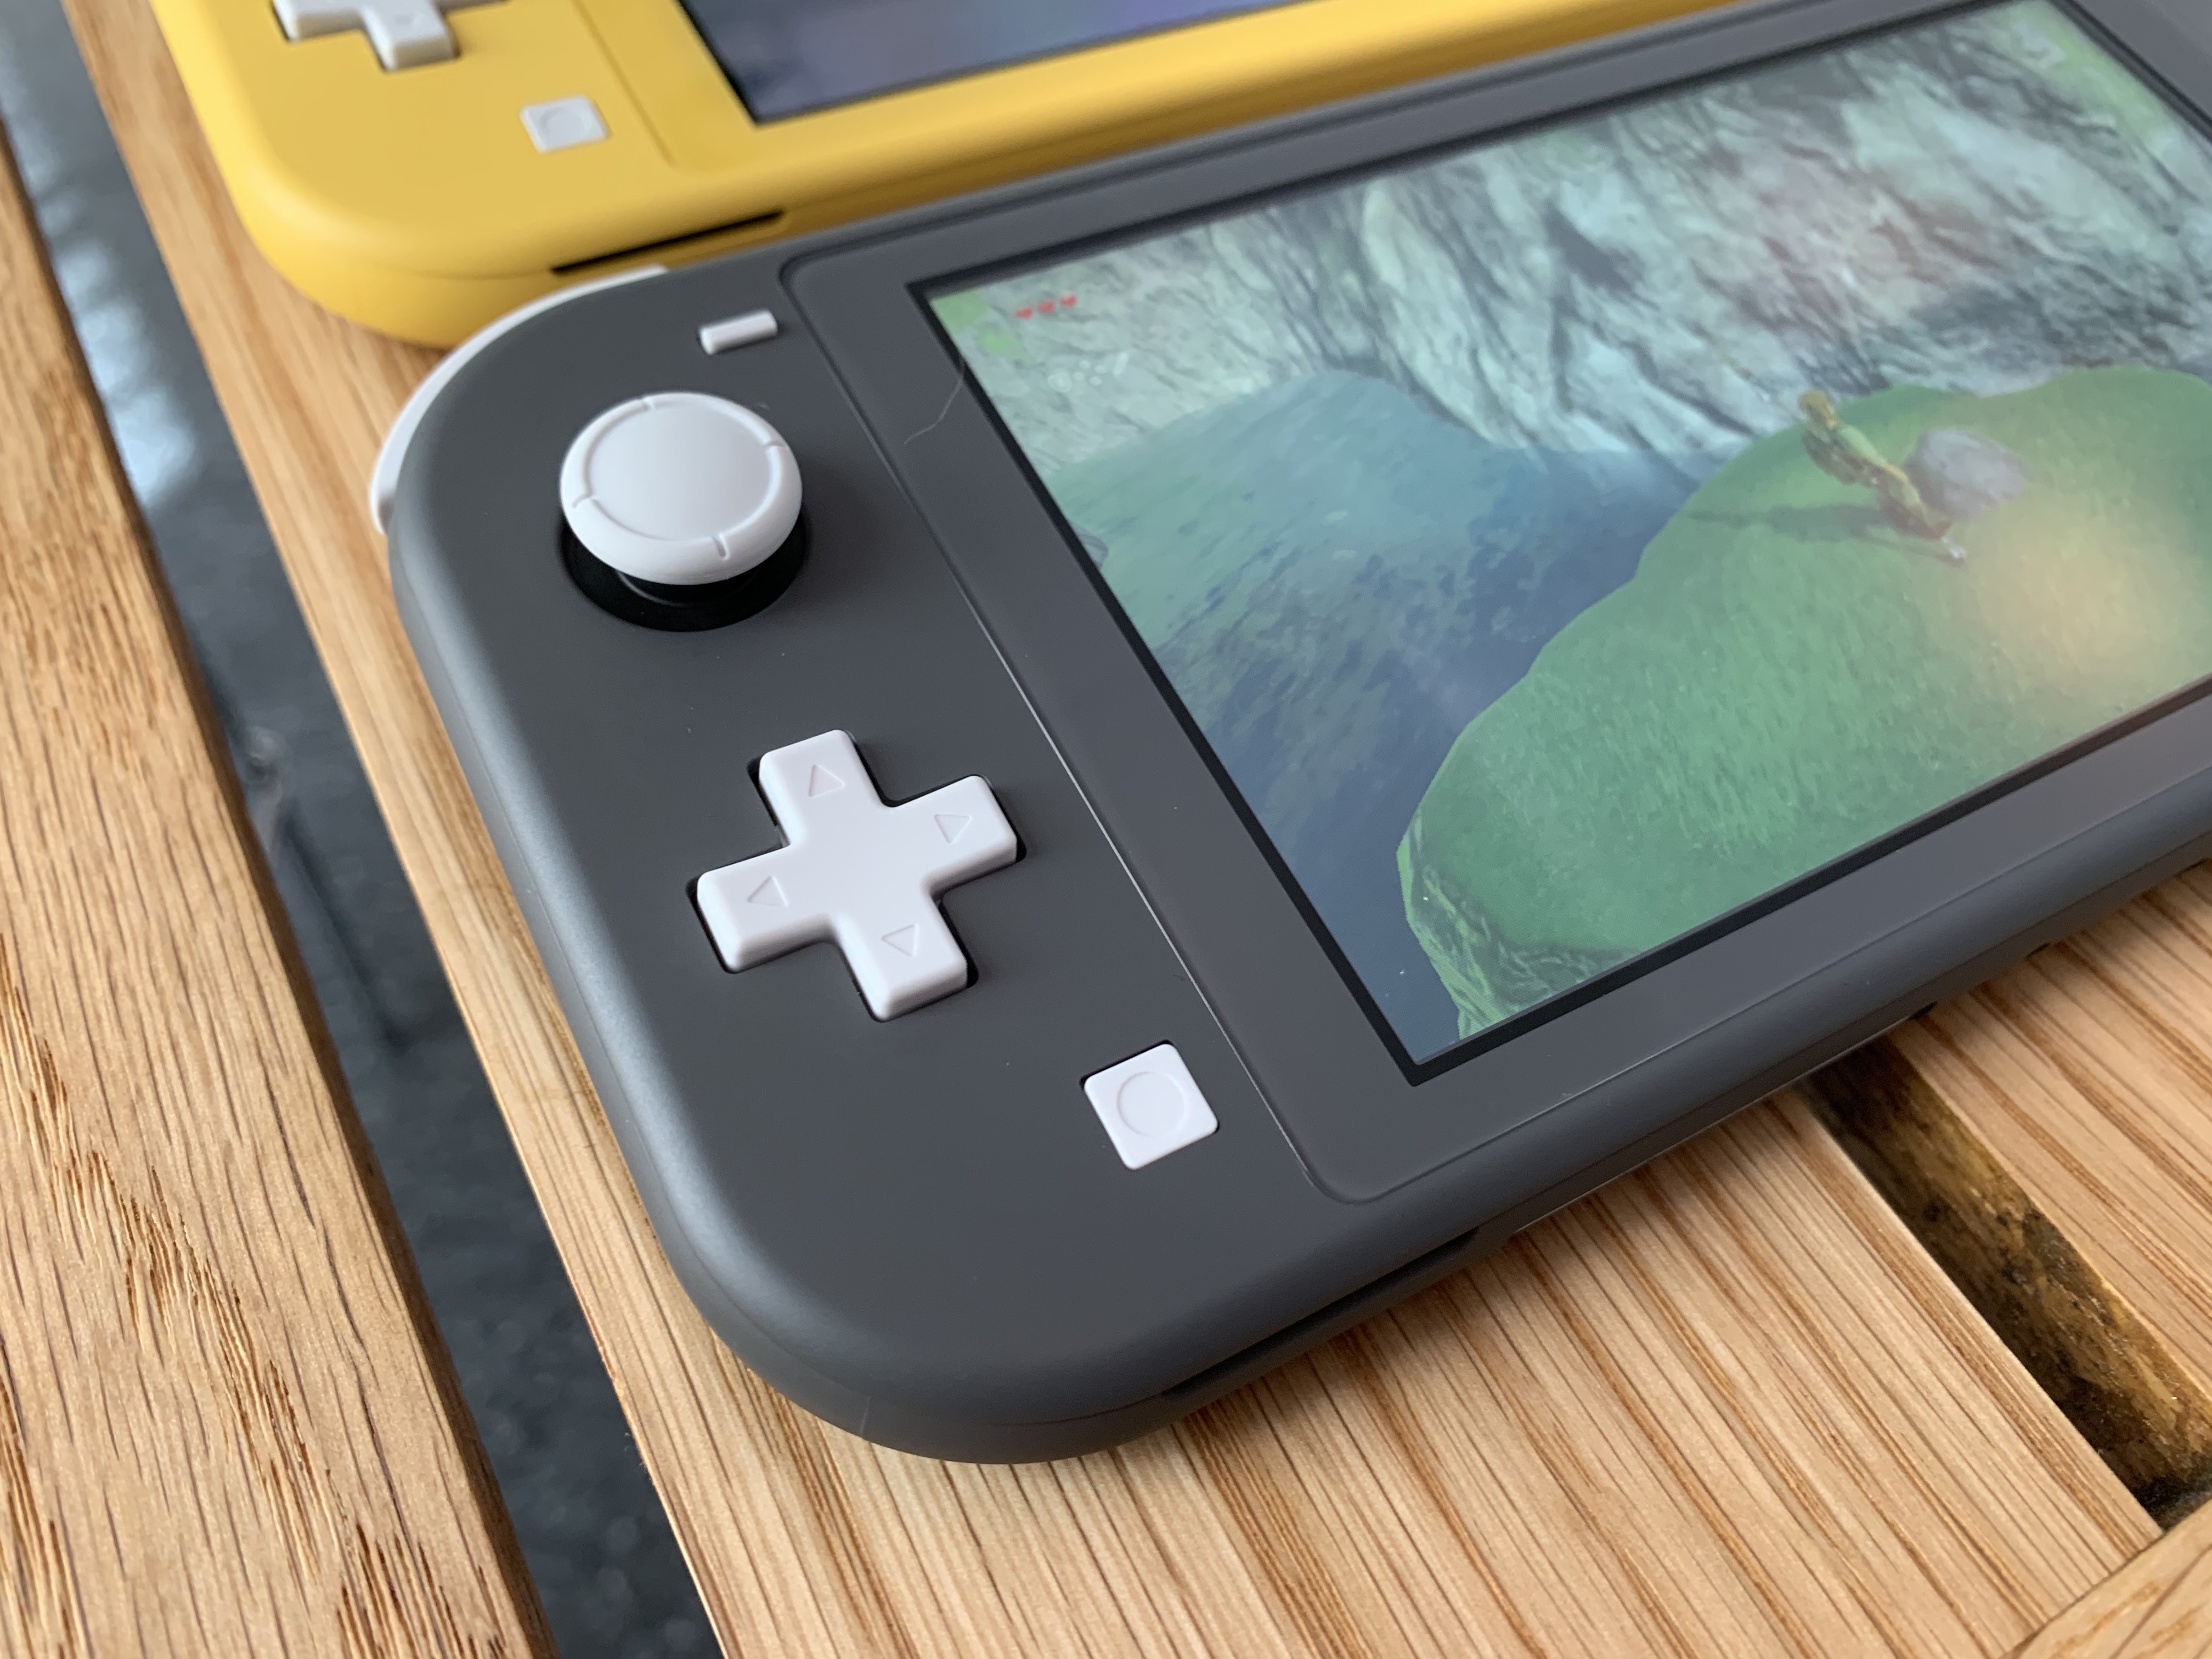 Nintendo Switch Lite Hands On An Excellent Handheld Console That Feels Great Cnn Underscored